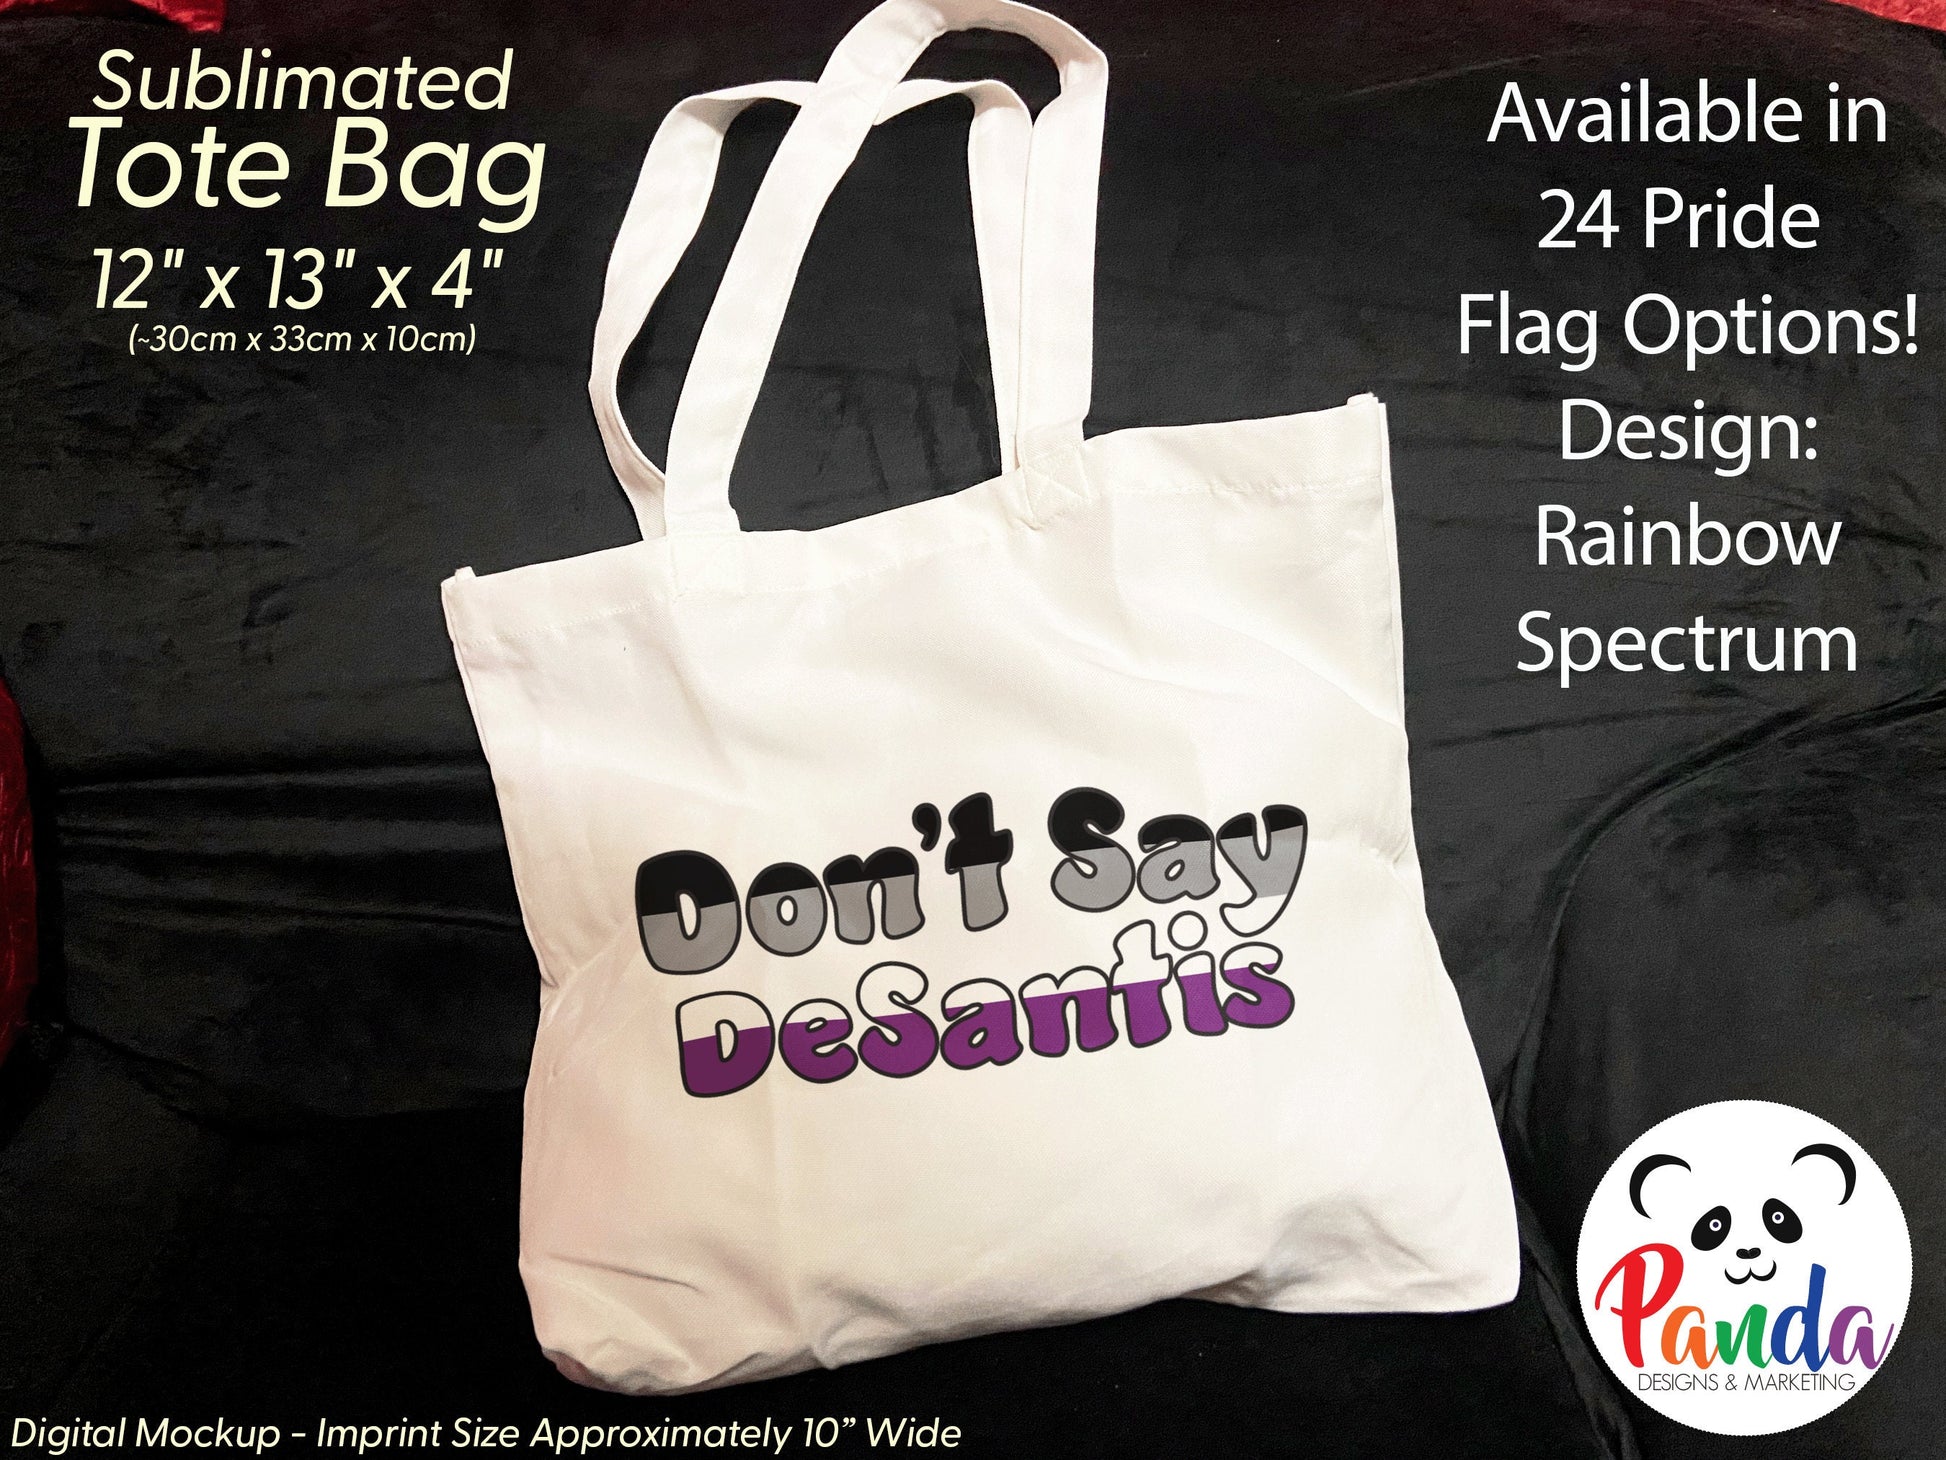 Photo of a white tote bag on a black velvet count. The back has "Don't Say DeSantis" in asexual  pride flag colors with black outline of fun shaped text